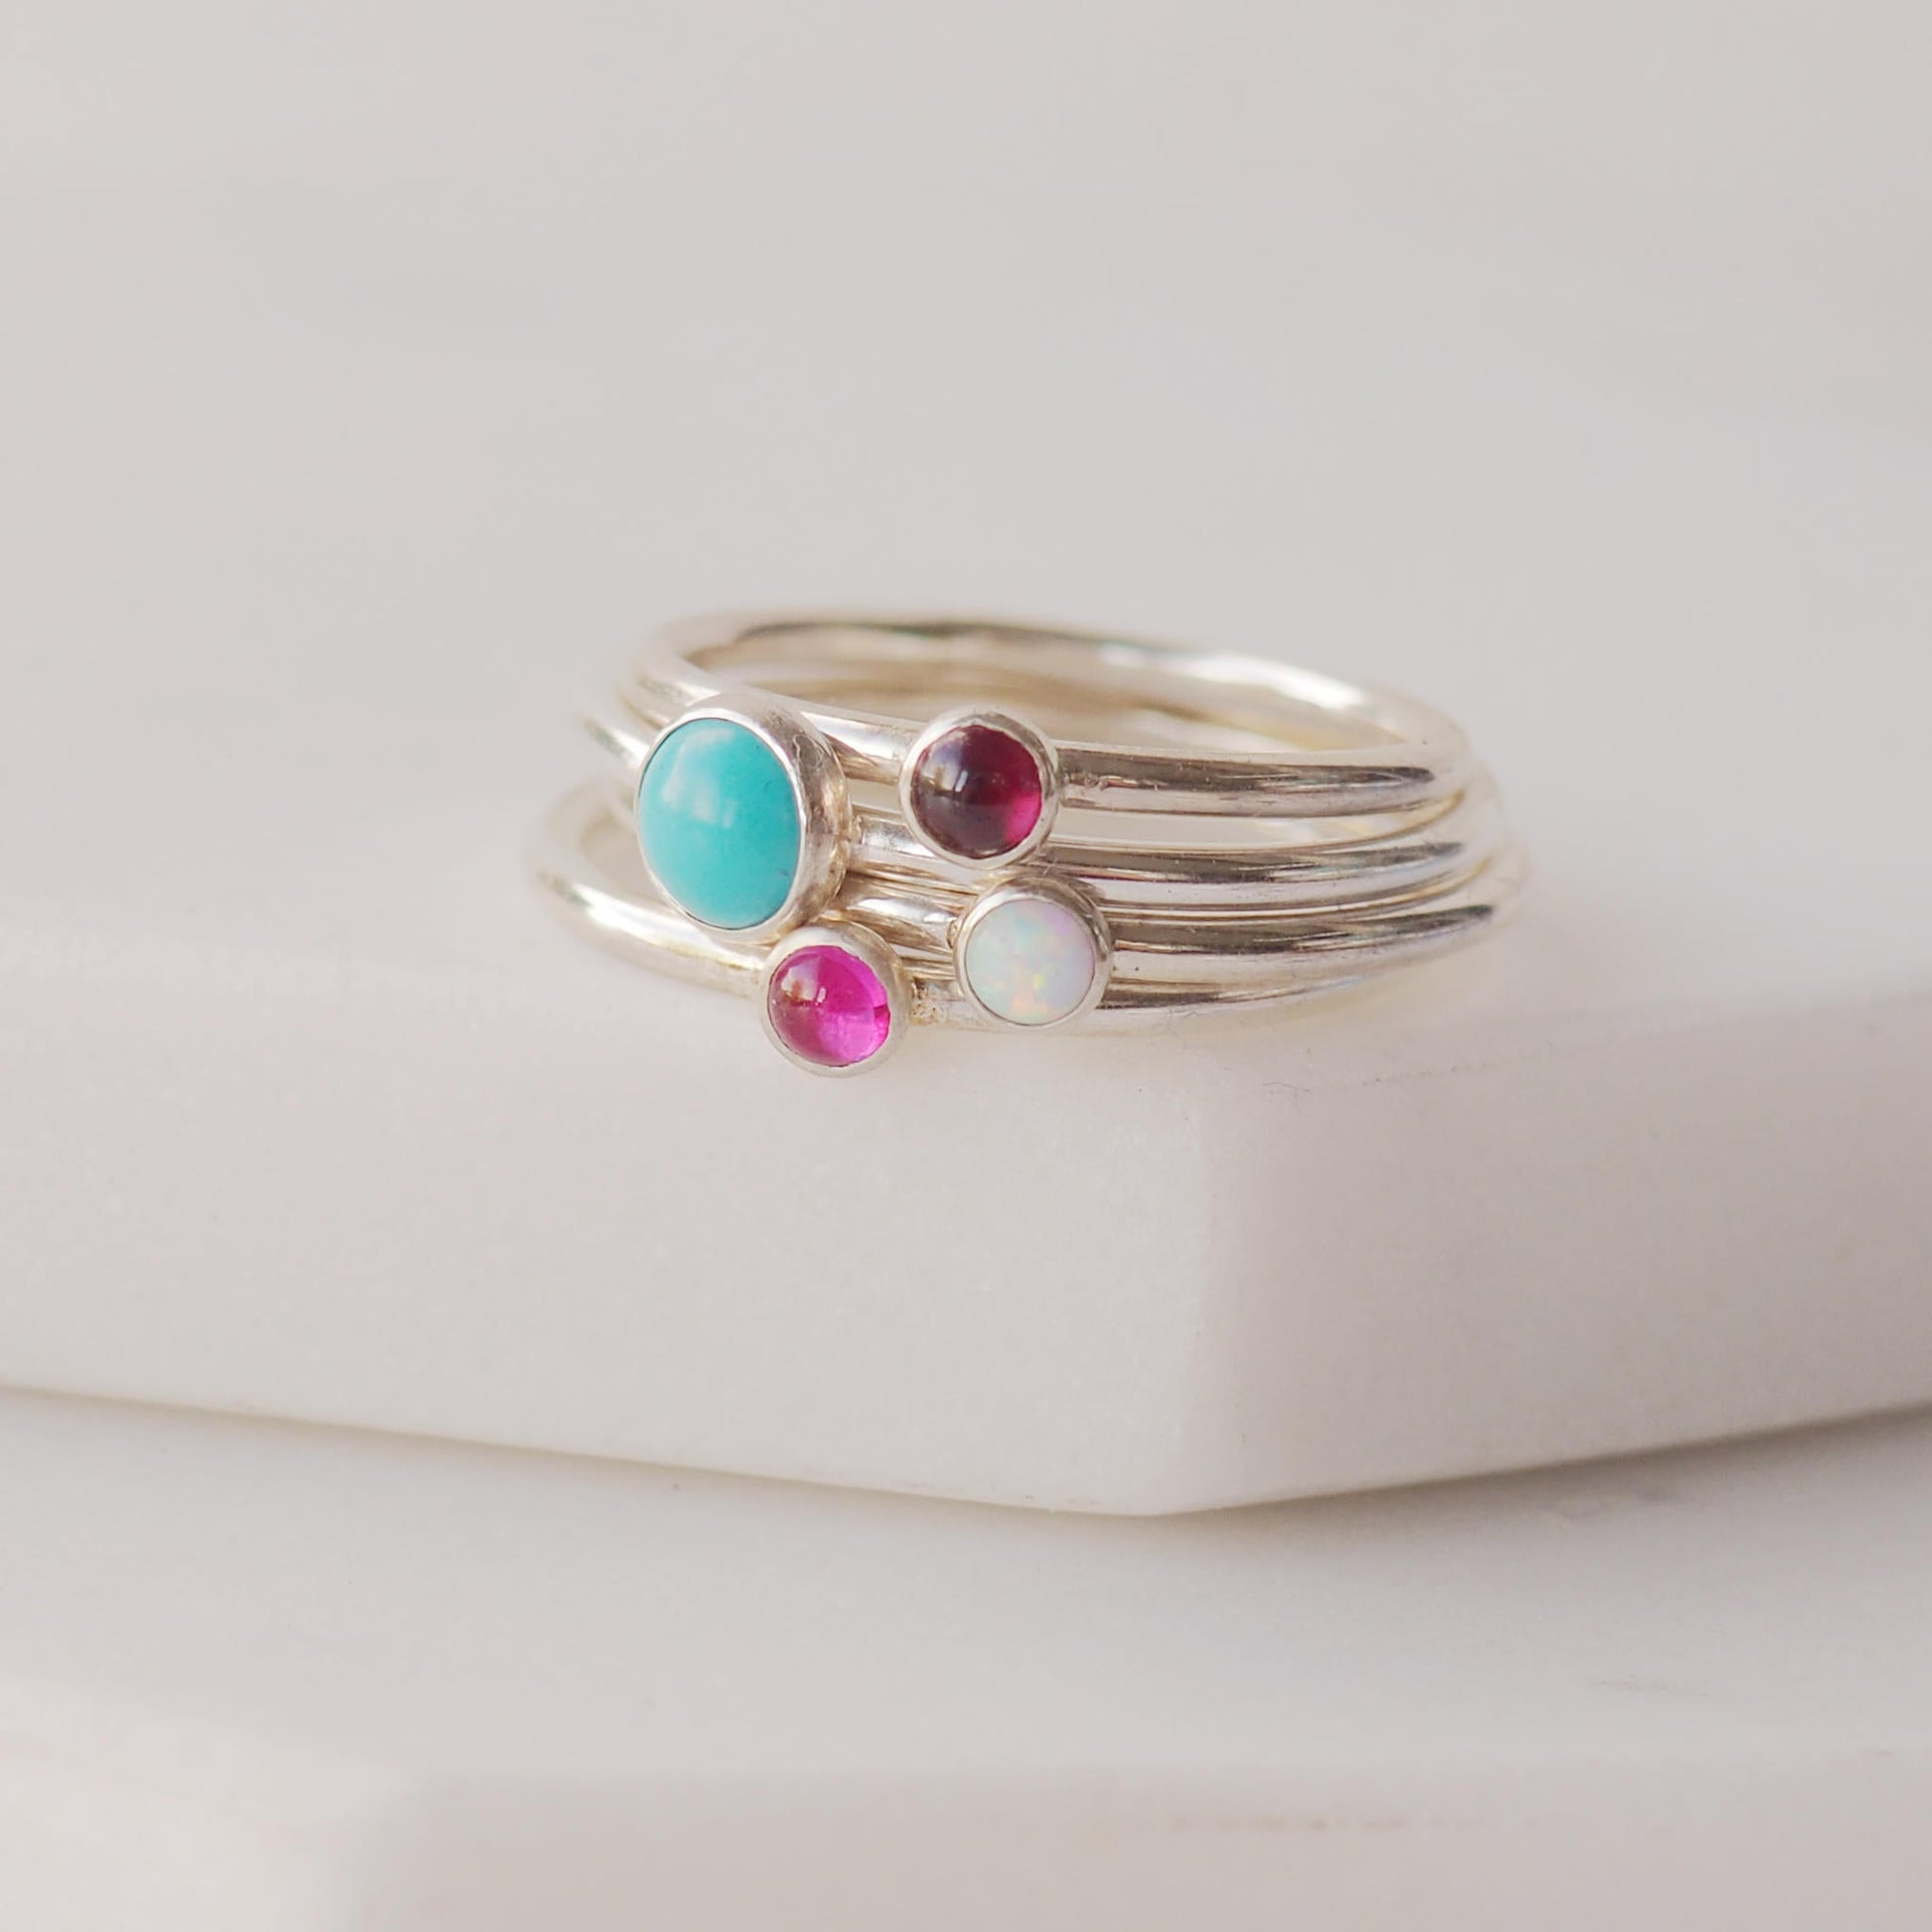 Four ring birthstone set with a large Turquoise, smaller garnet, Lab Opal and Lab Ruby. Handmade by maram jewellery in Scotland UK 